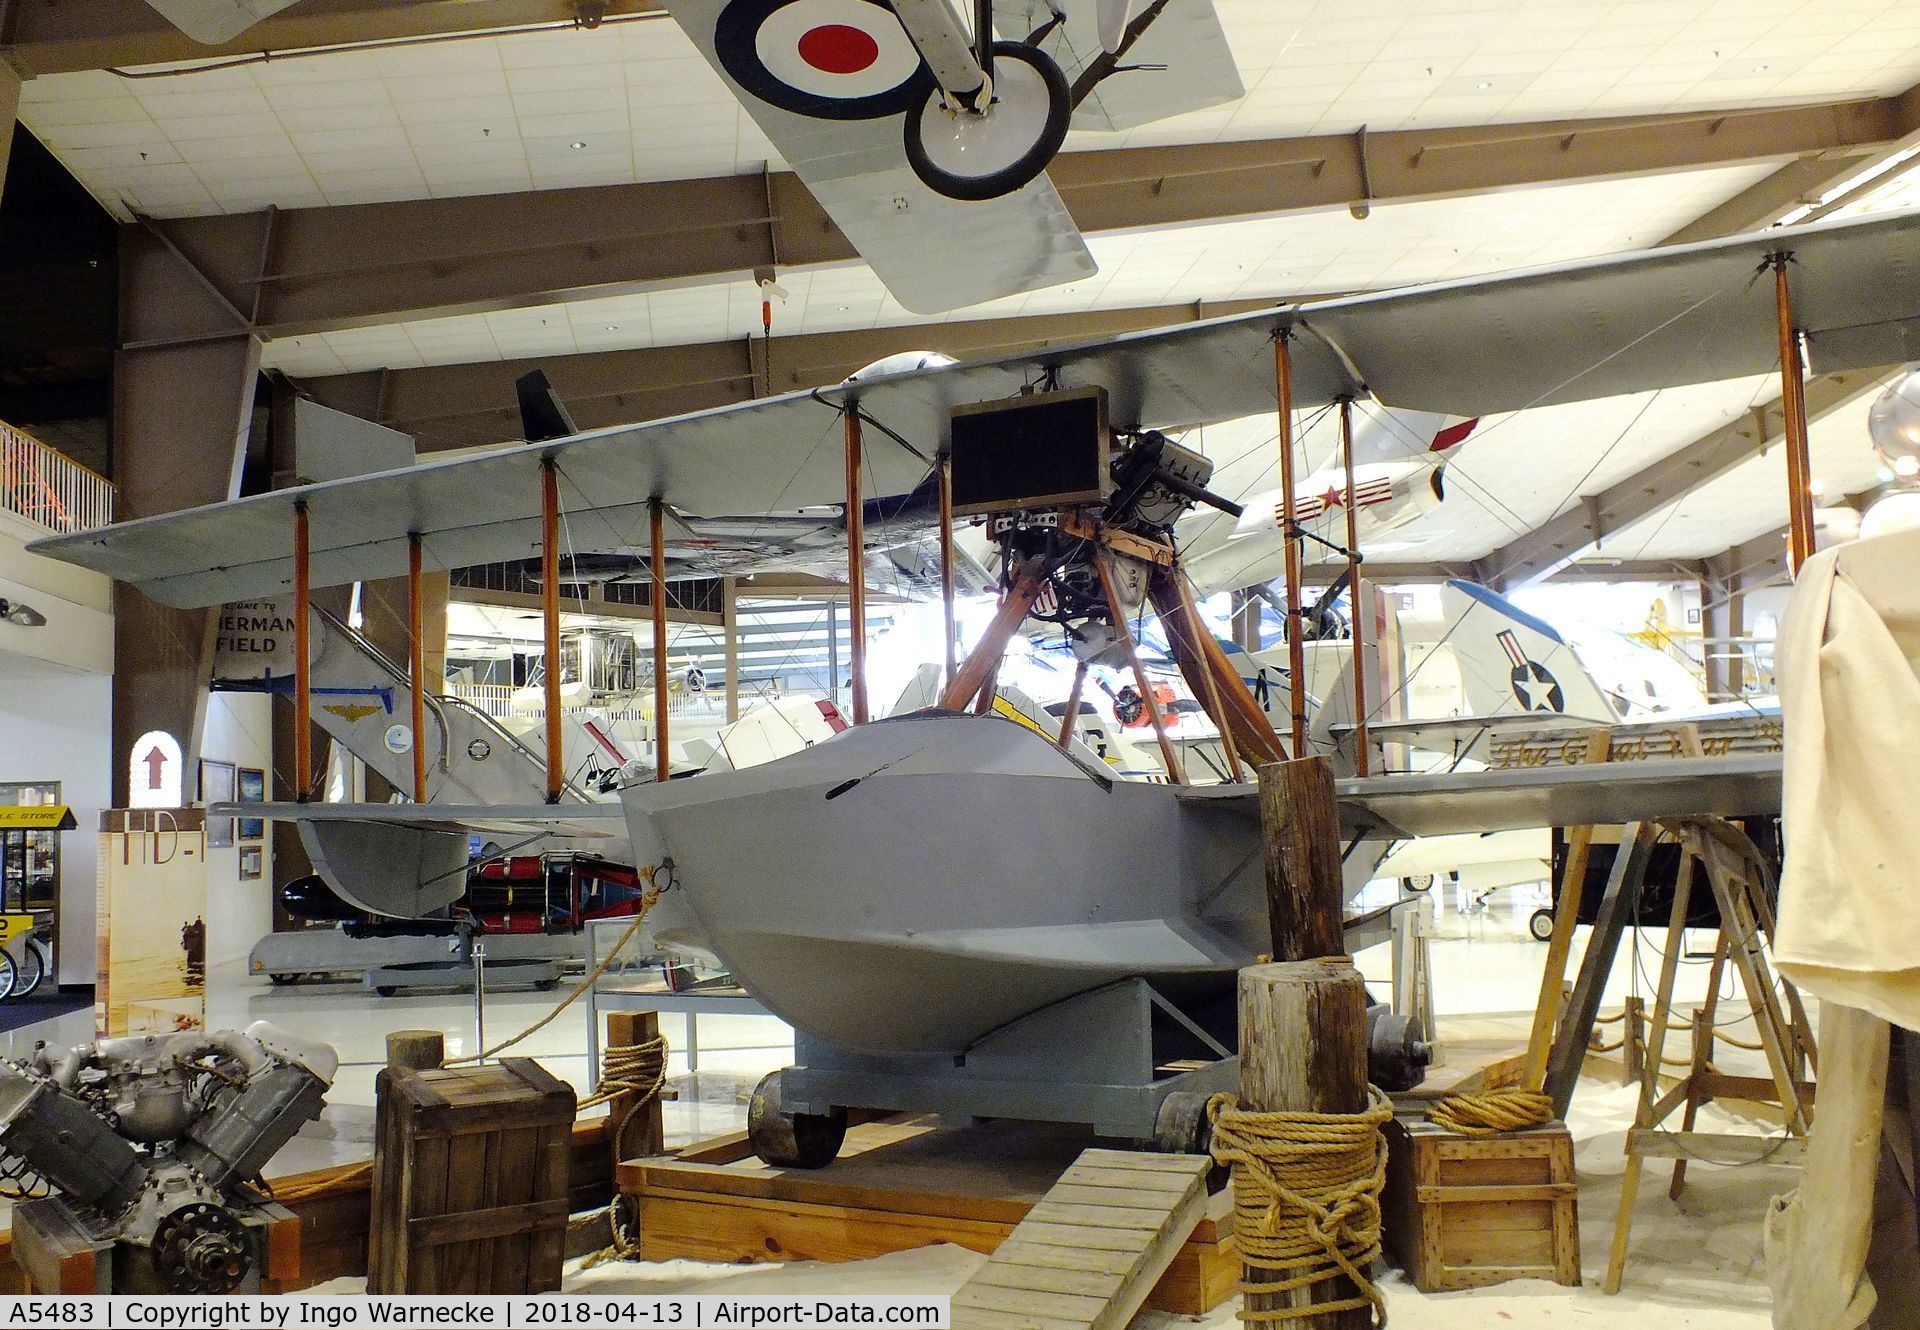 A5483, 1918 Curtiss MF-Boat C/N Not found A5483, Curtiss MF-Boat at the NMNA, Pensacola